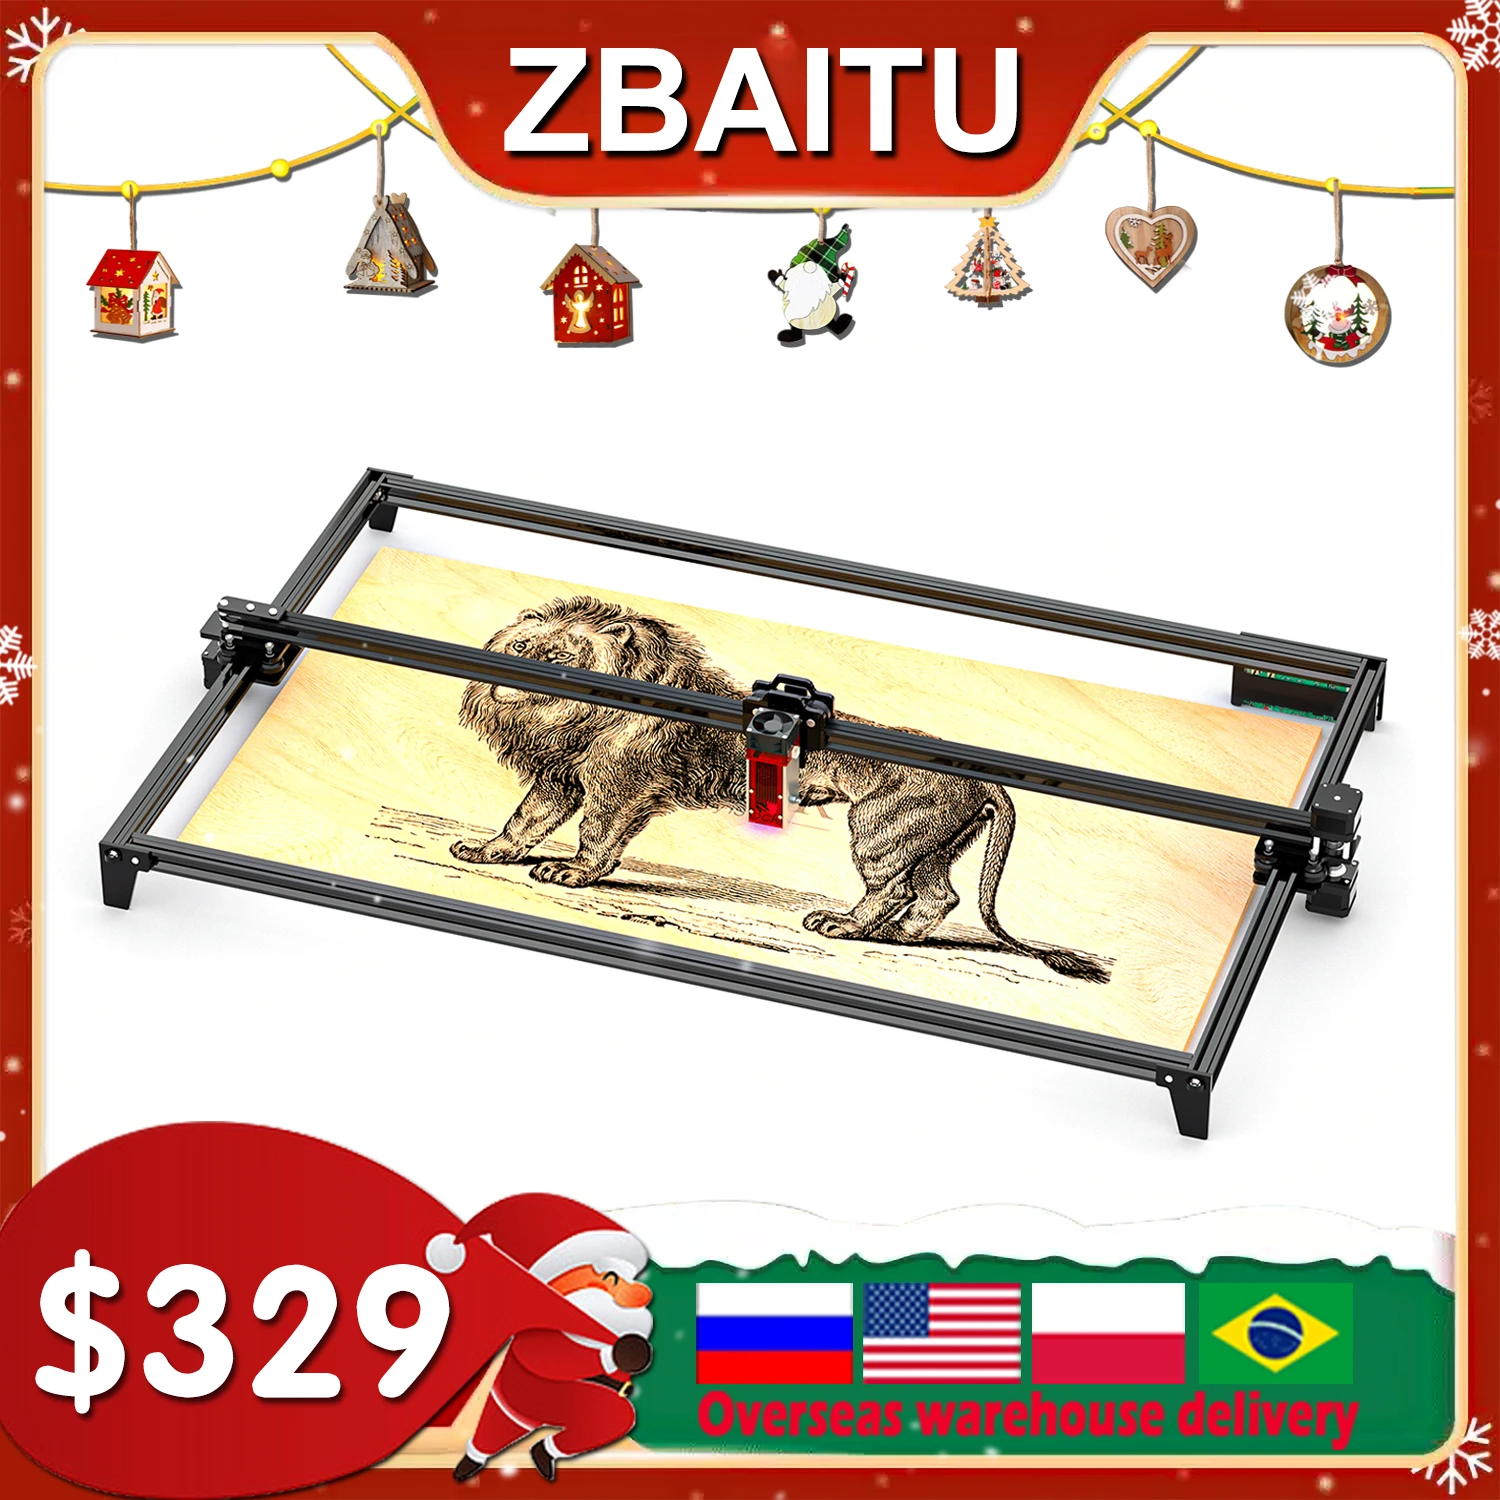 ZBAITU Laser Engraving 81x46cm/80x80cm Diode Wood Router Engraving and Cutting Machine Built-in Air Assist